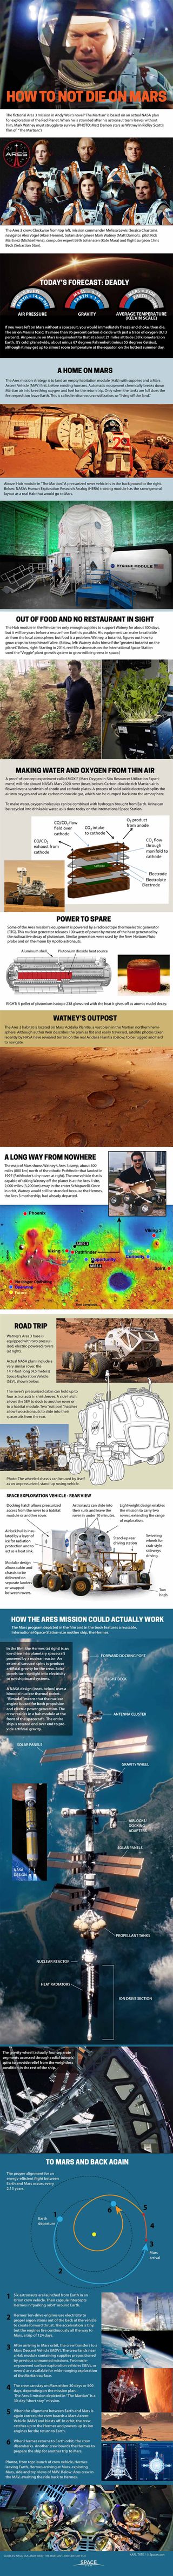 In the film "The Martian" (2015), an astronaut played by Matt Damon has to improvise when his crew leaves him behind by accident. Check out our full infographic to see what we think it would take to survive on Mars.